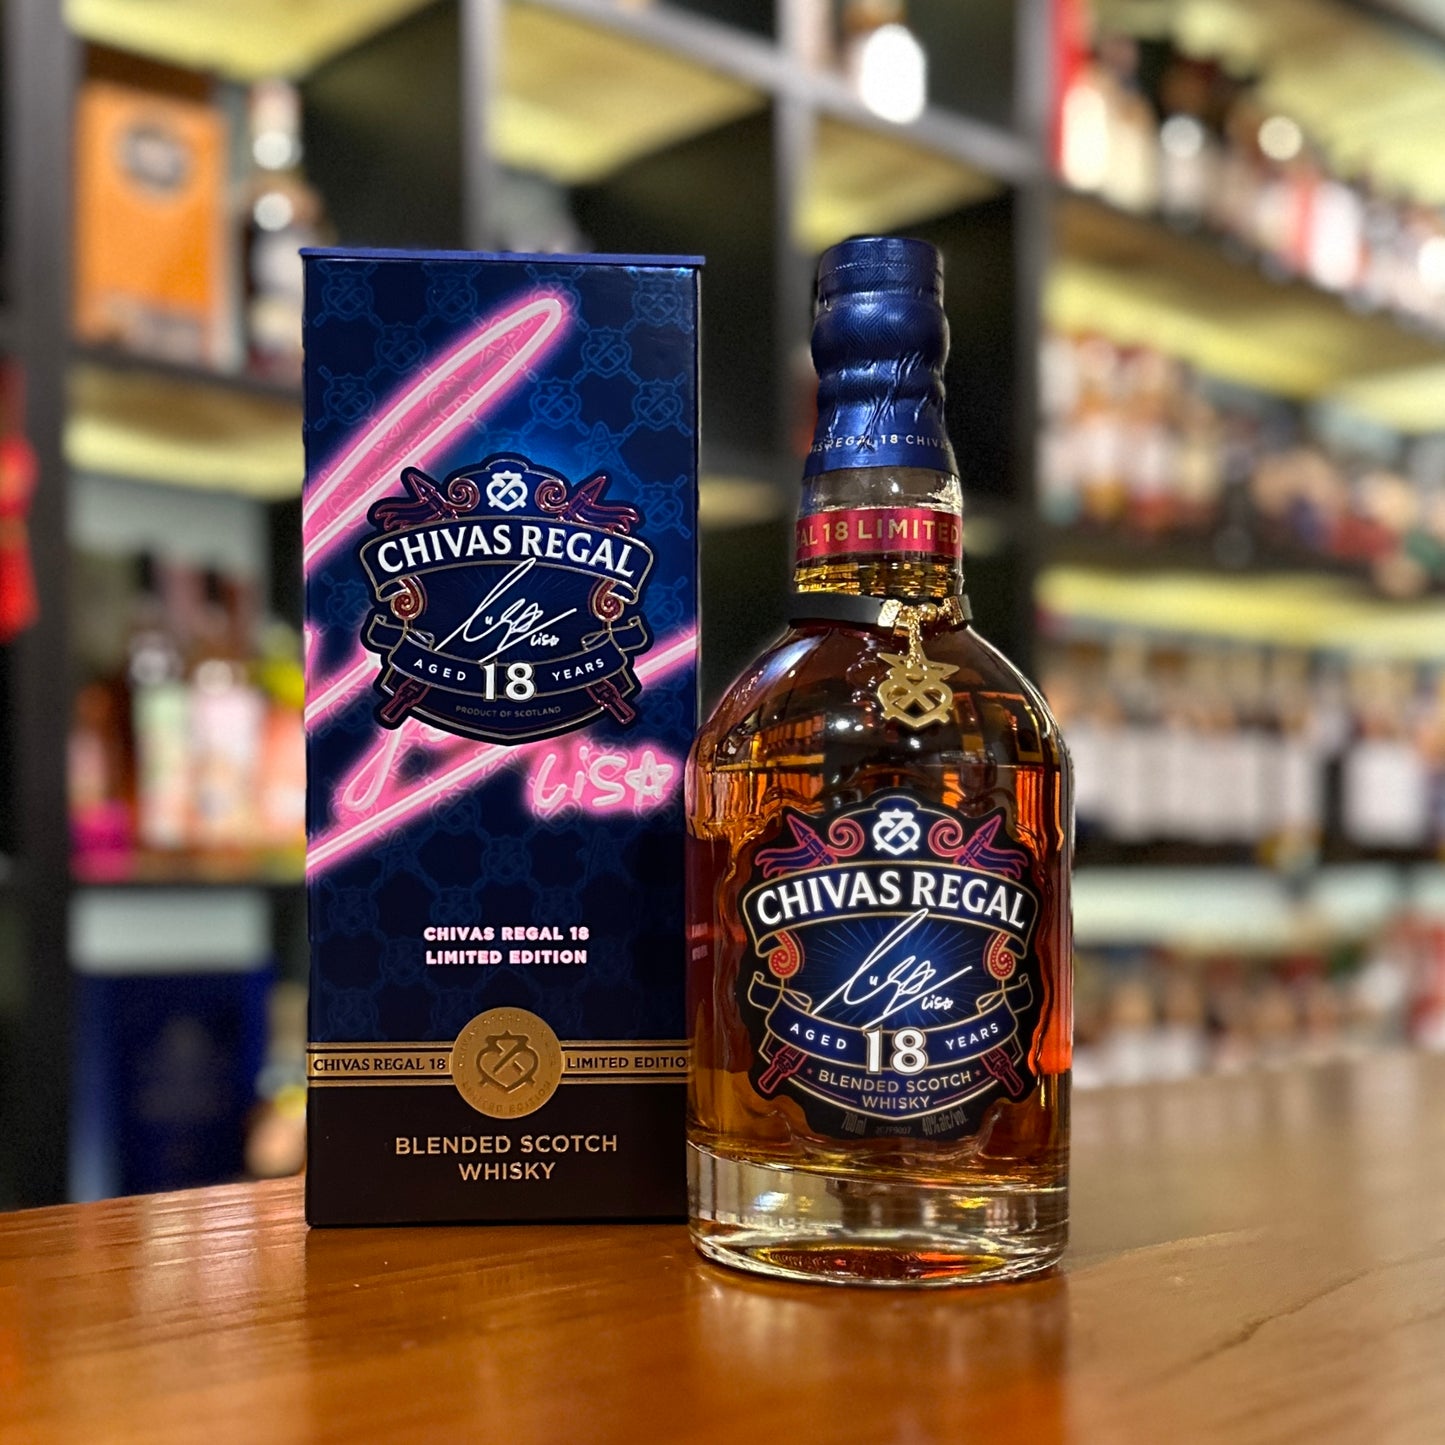 Chivas Regal 18 Year Old LISA Limited Edition Blended Scotch Whisky